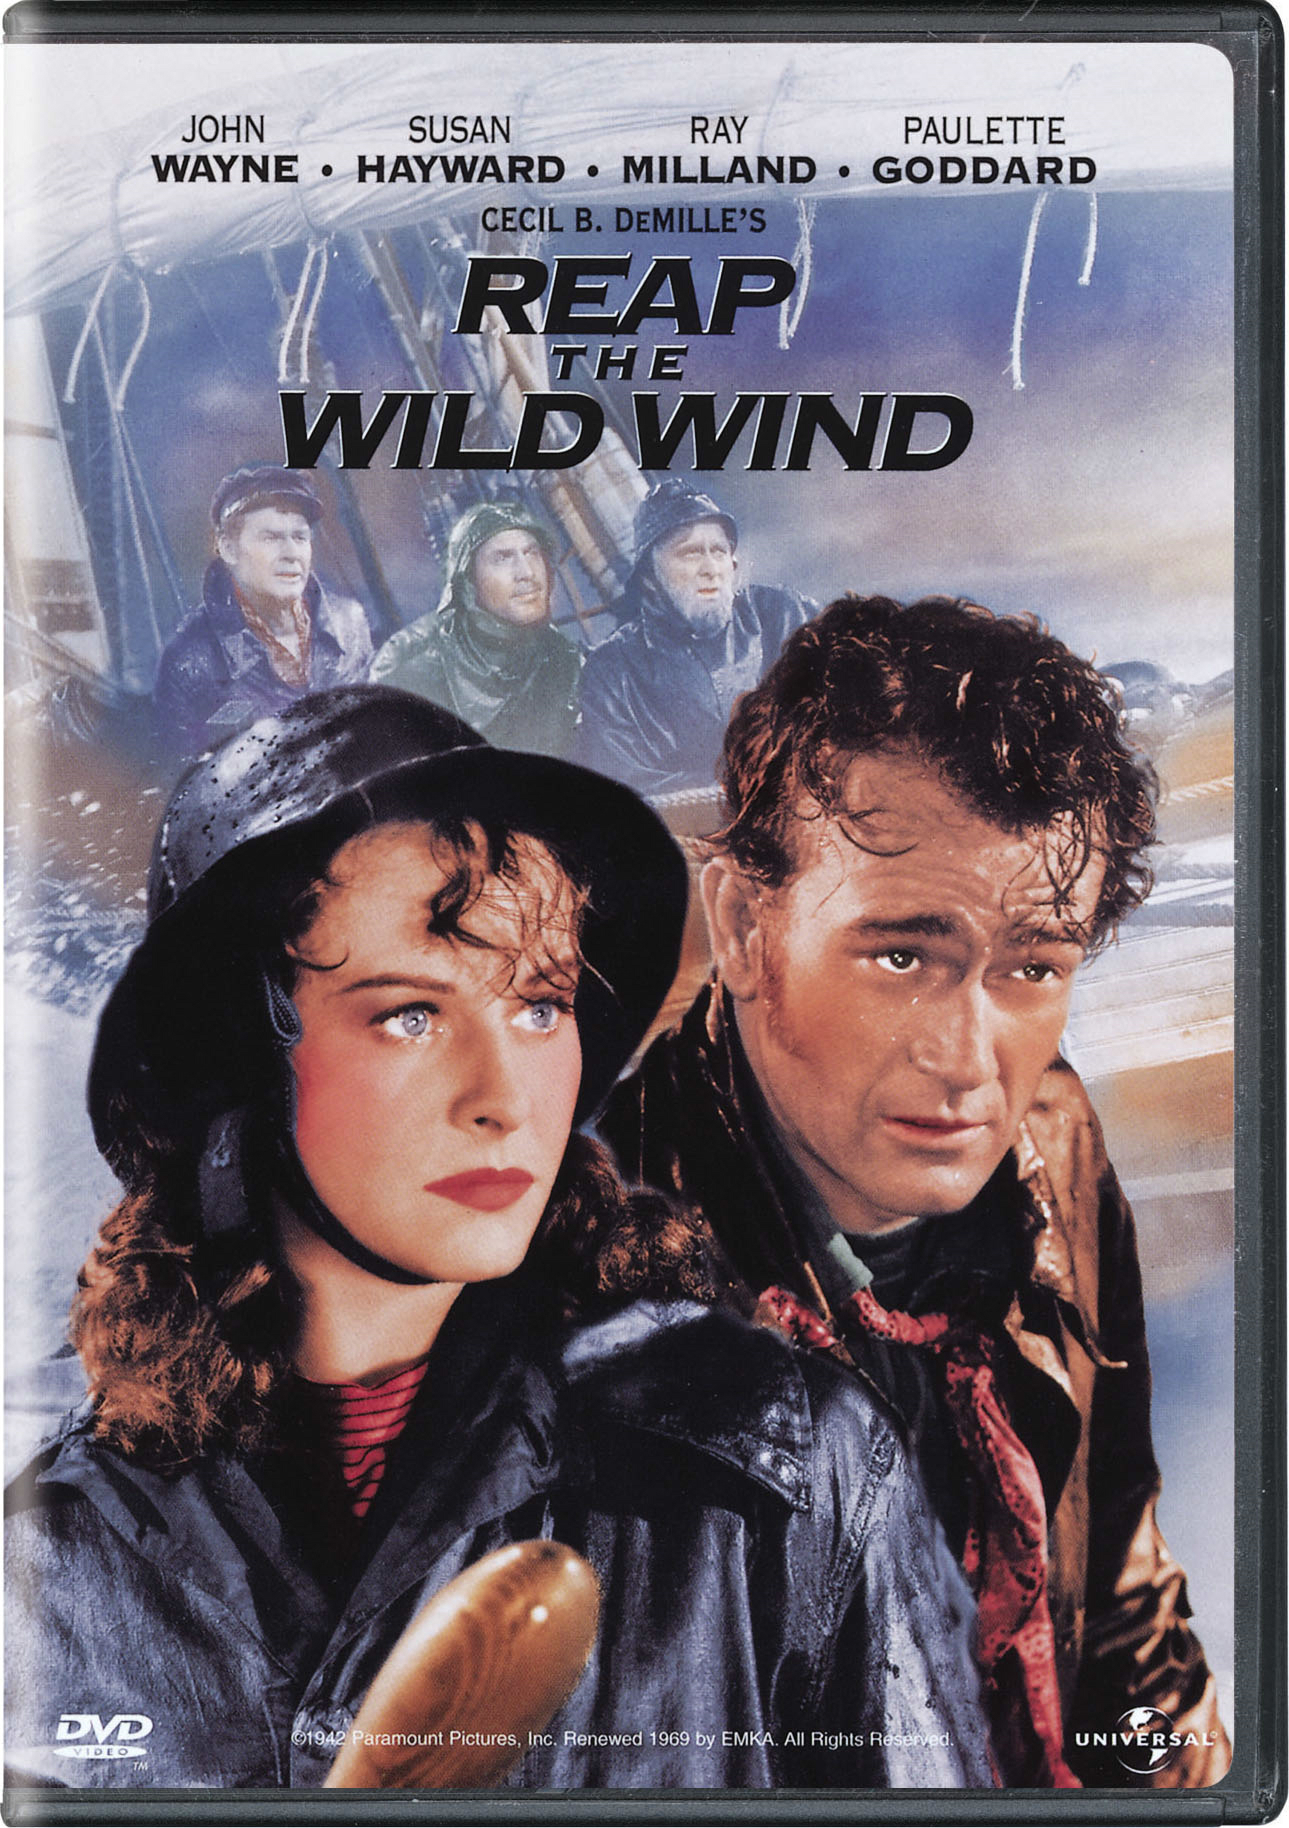 Reap The Wild Wind - DVD [ 1942 ]  - Classic Movies On DVD - Movies On GRUV